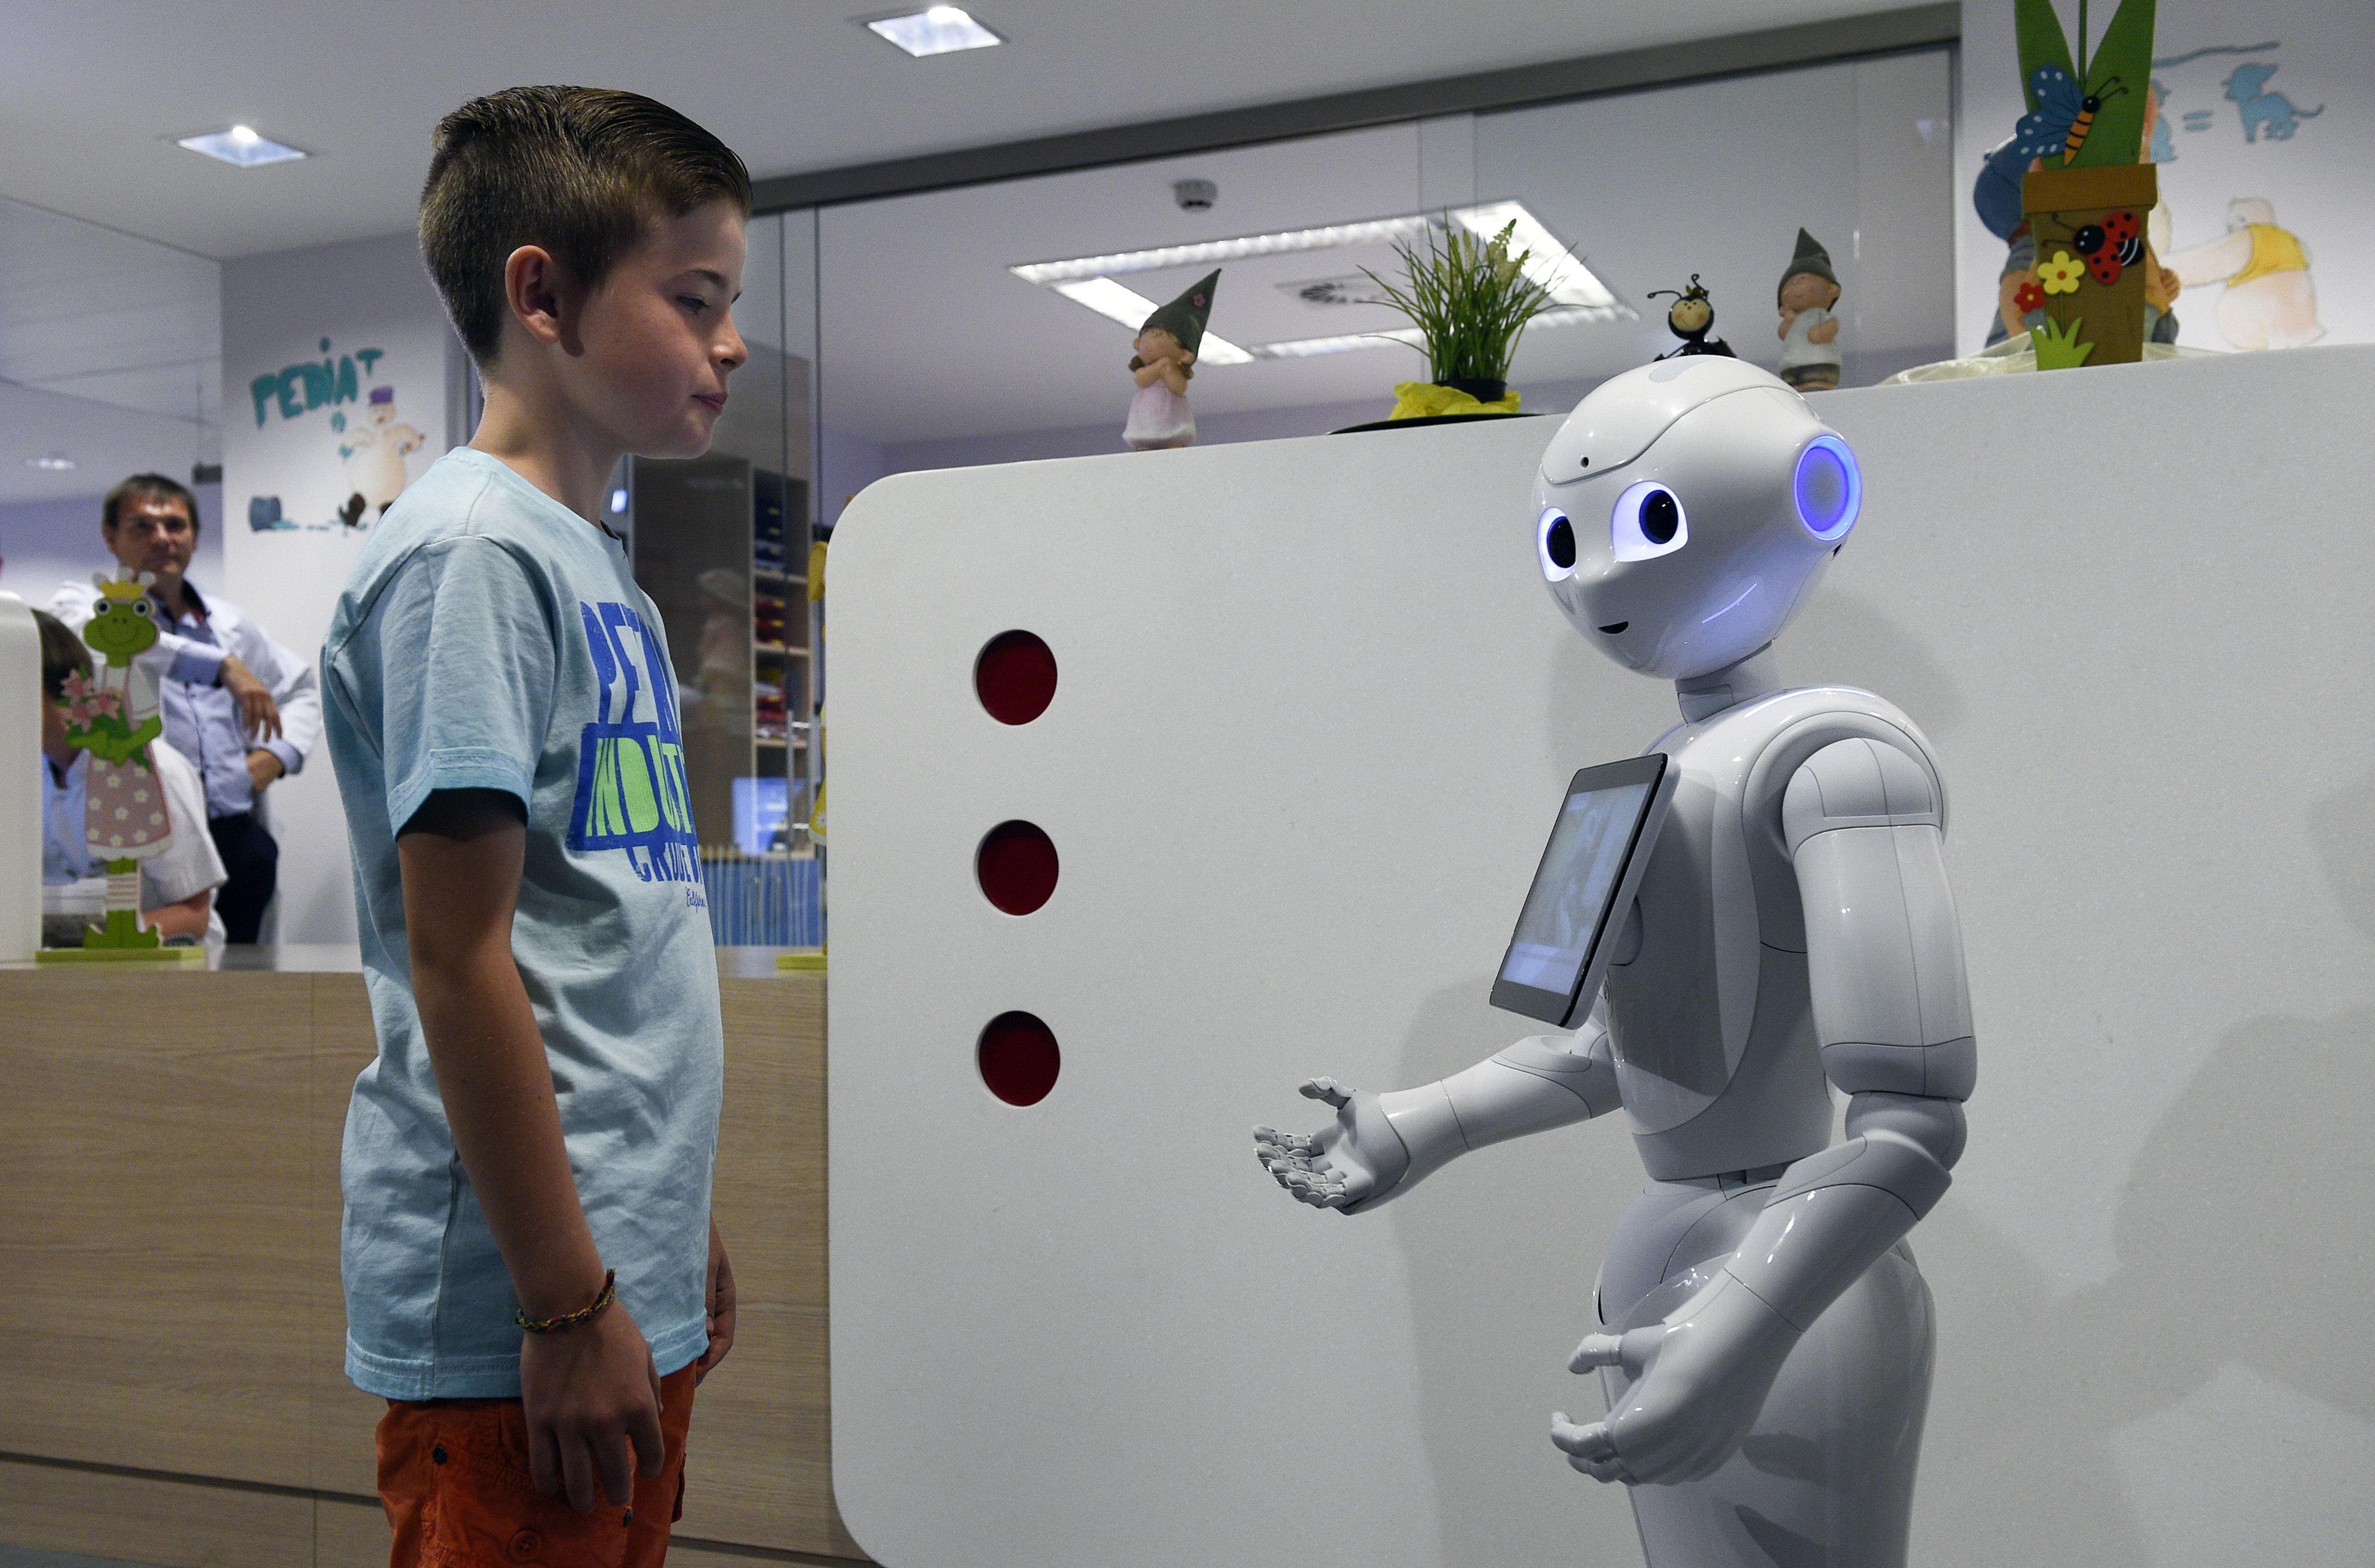 A young boy talks with the robot Pepper during a  press conference on June 13, 2016 at the CHR Citadel hospital centers of Liege (John Thys—AFP/Getty Images)